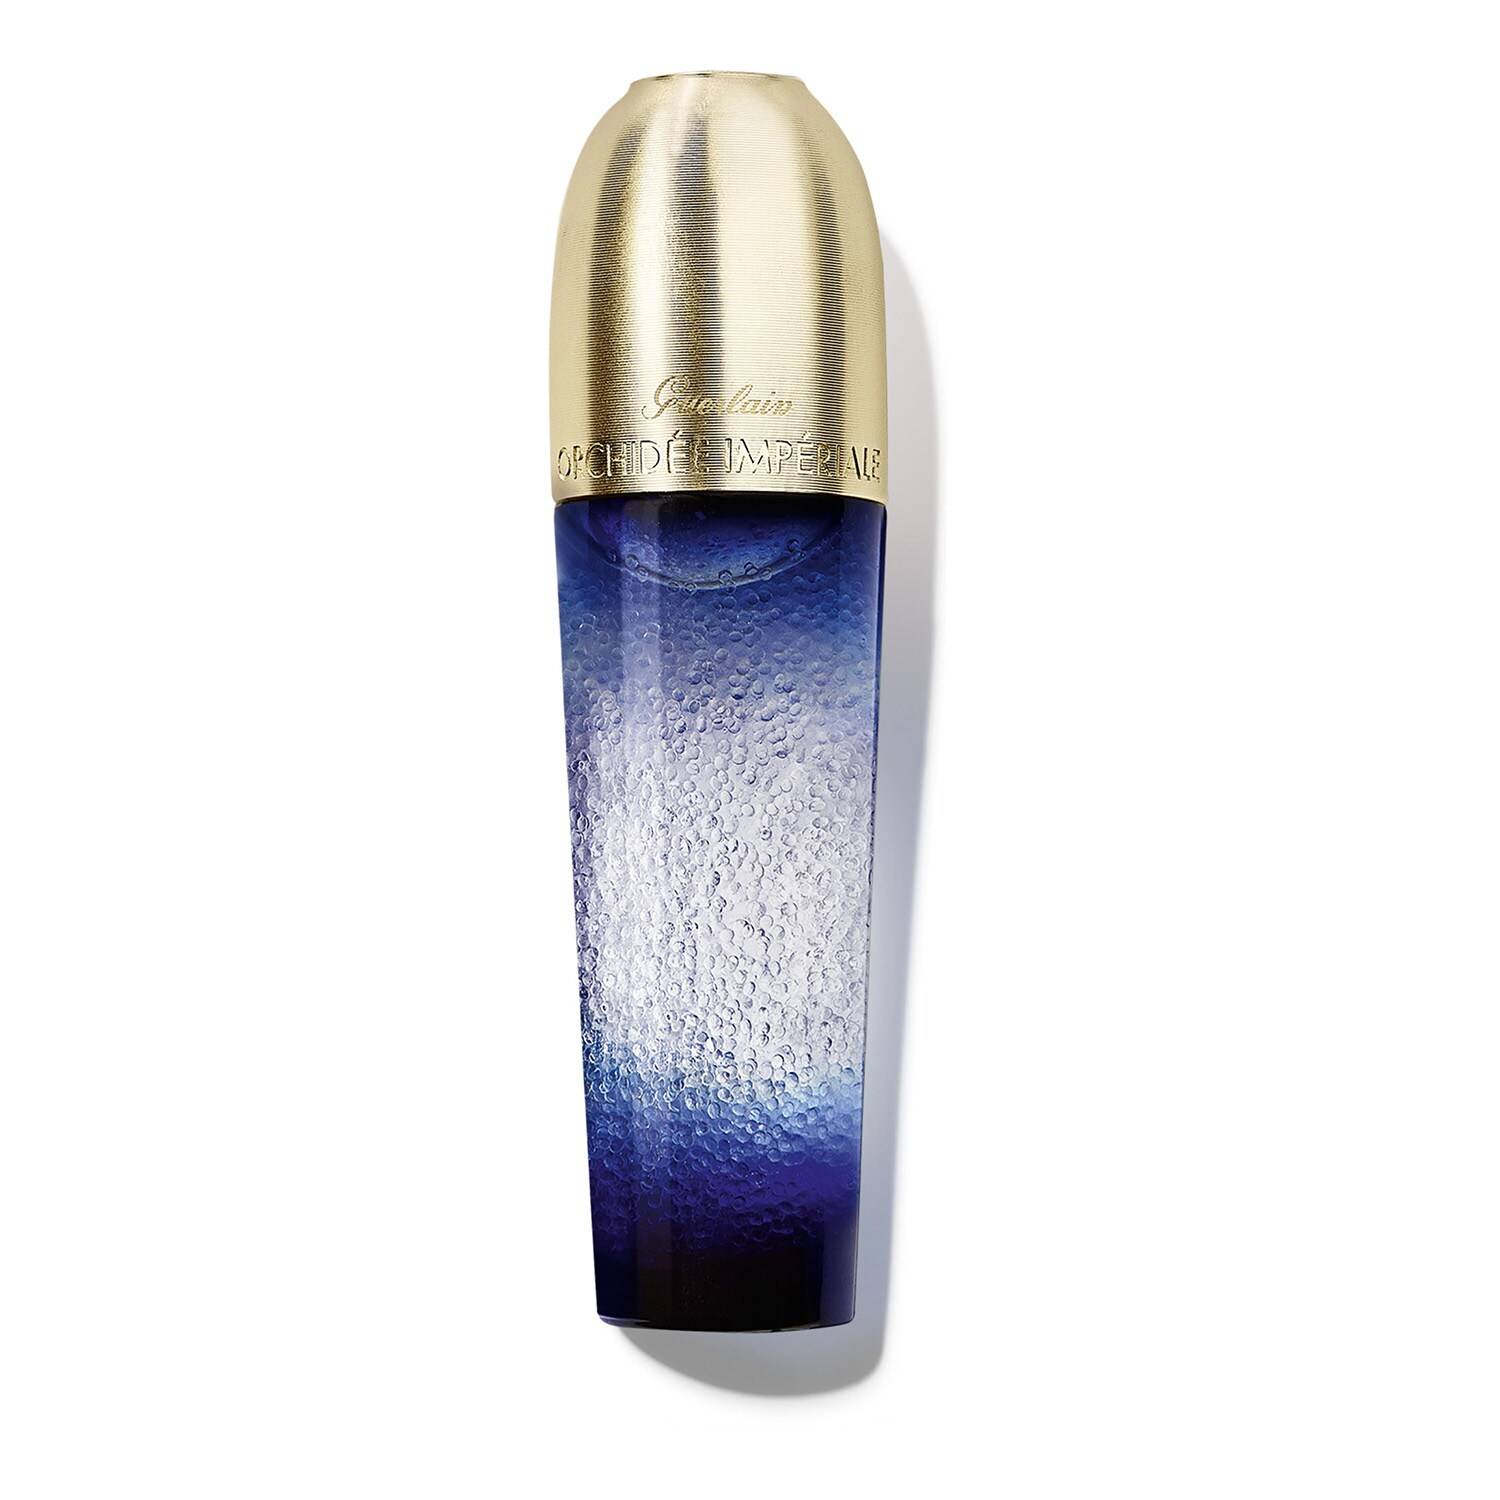 Guerlain Orchidee Imperiale The Micro-Lift Concentrate 30Ml